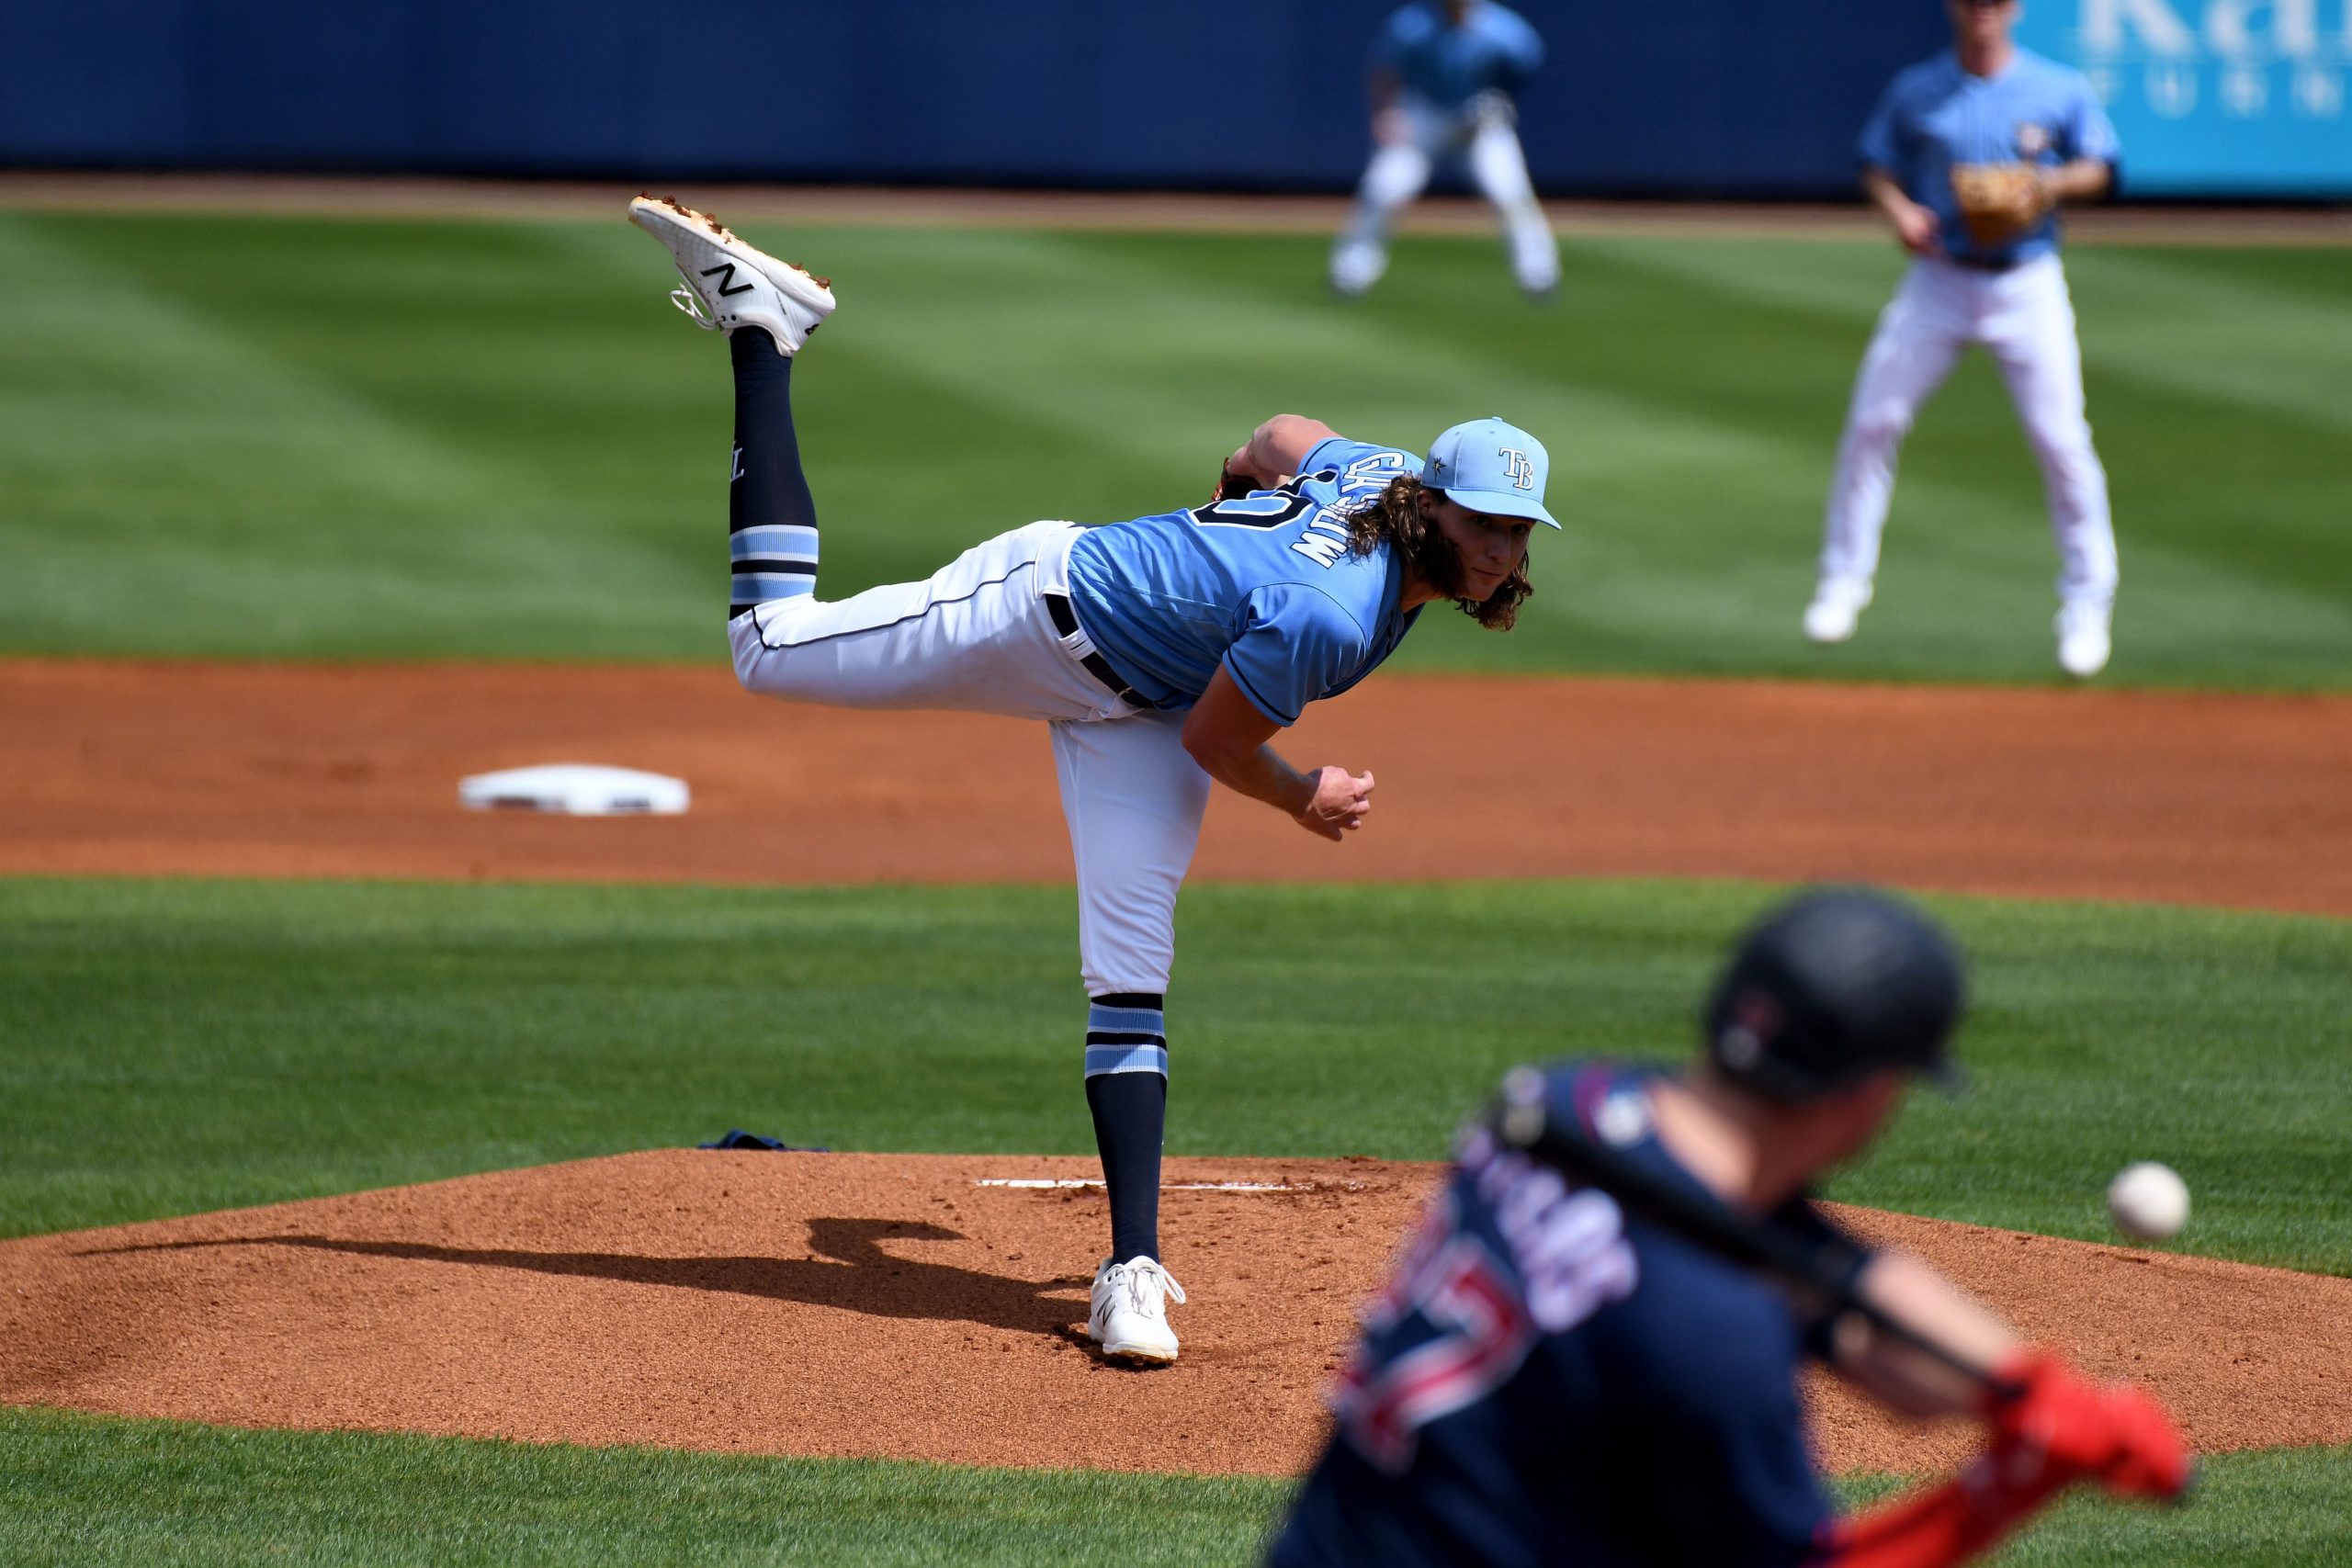 Tampa Bay Rays pitcher Tyler Glasnow (20) throws a pitch in the first inning against the Minnesota Twins during spring training at Charlotte Sports Park.